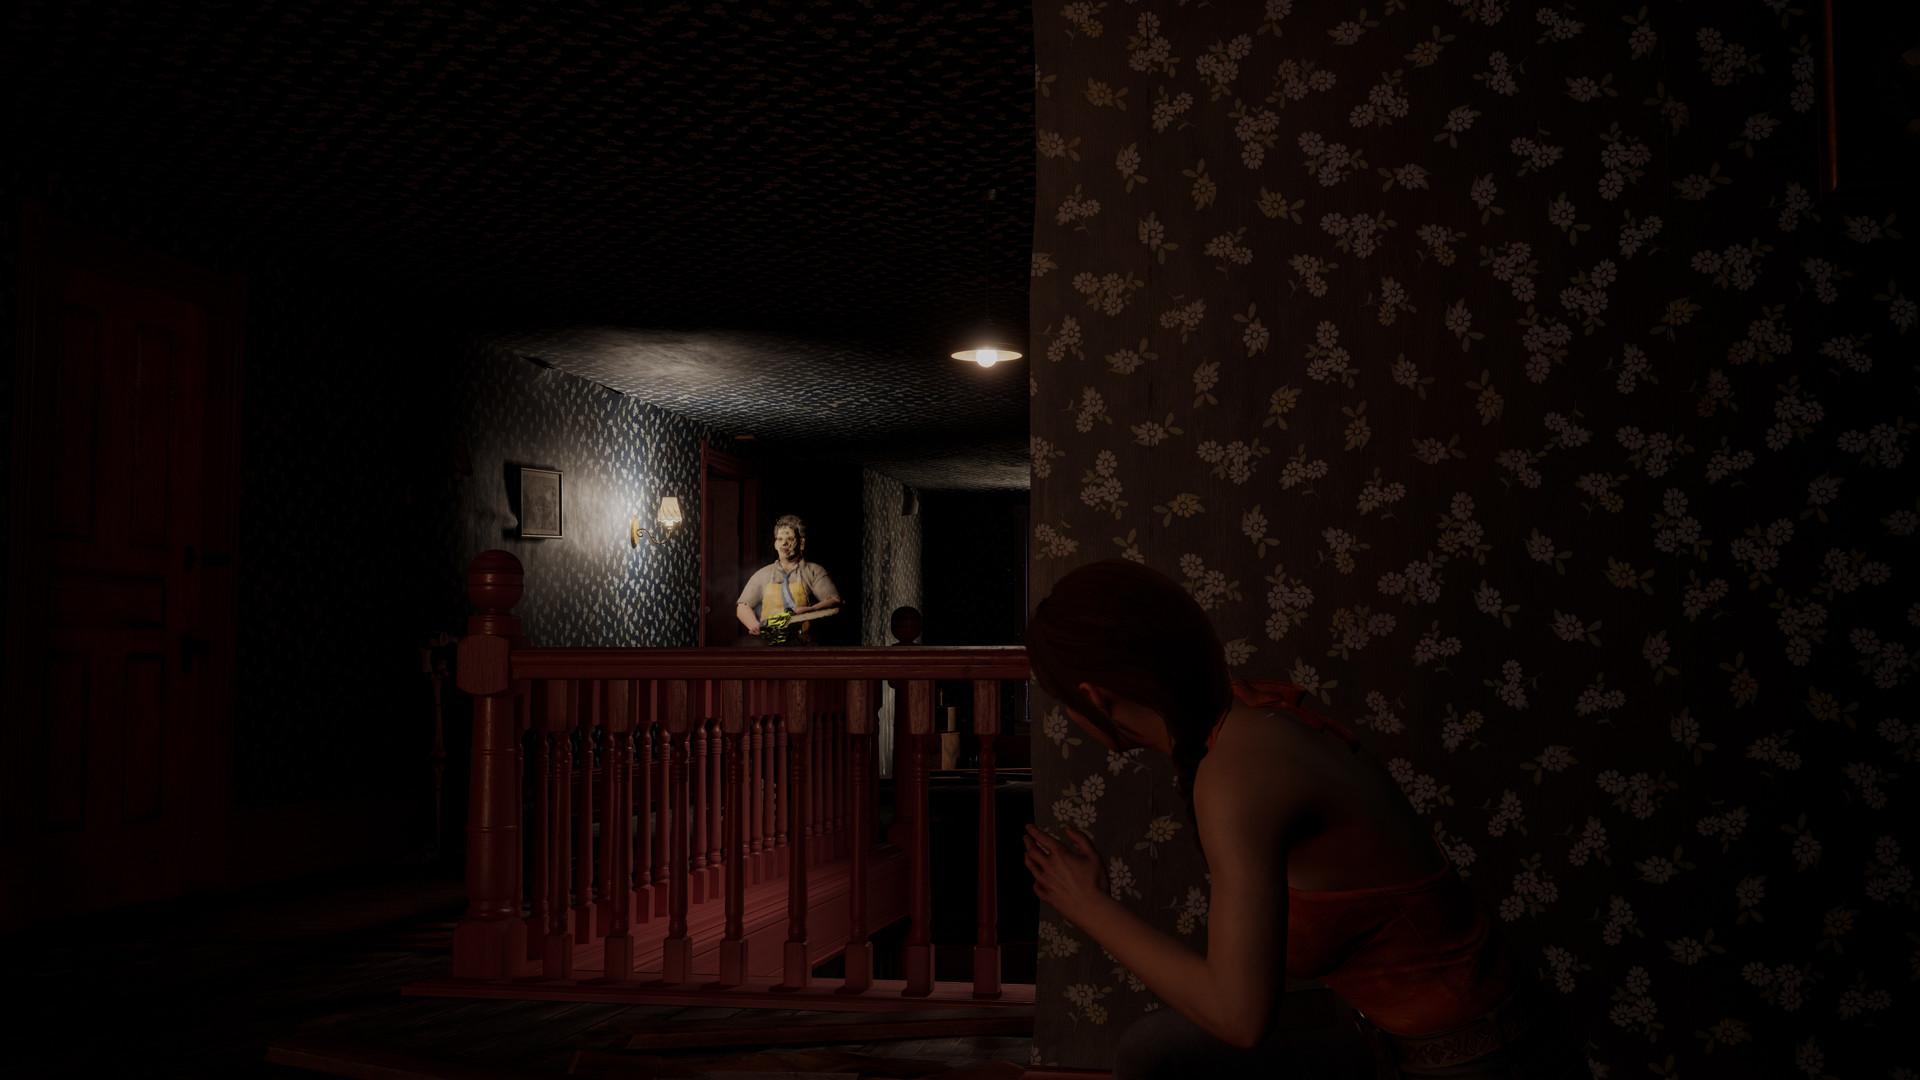 Screenshot №5 from game The Texas Chain Saw Massacre